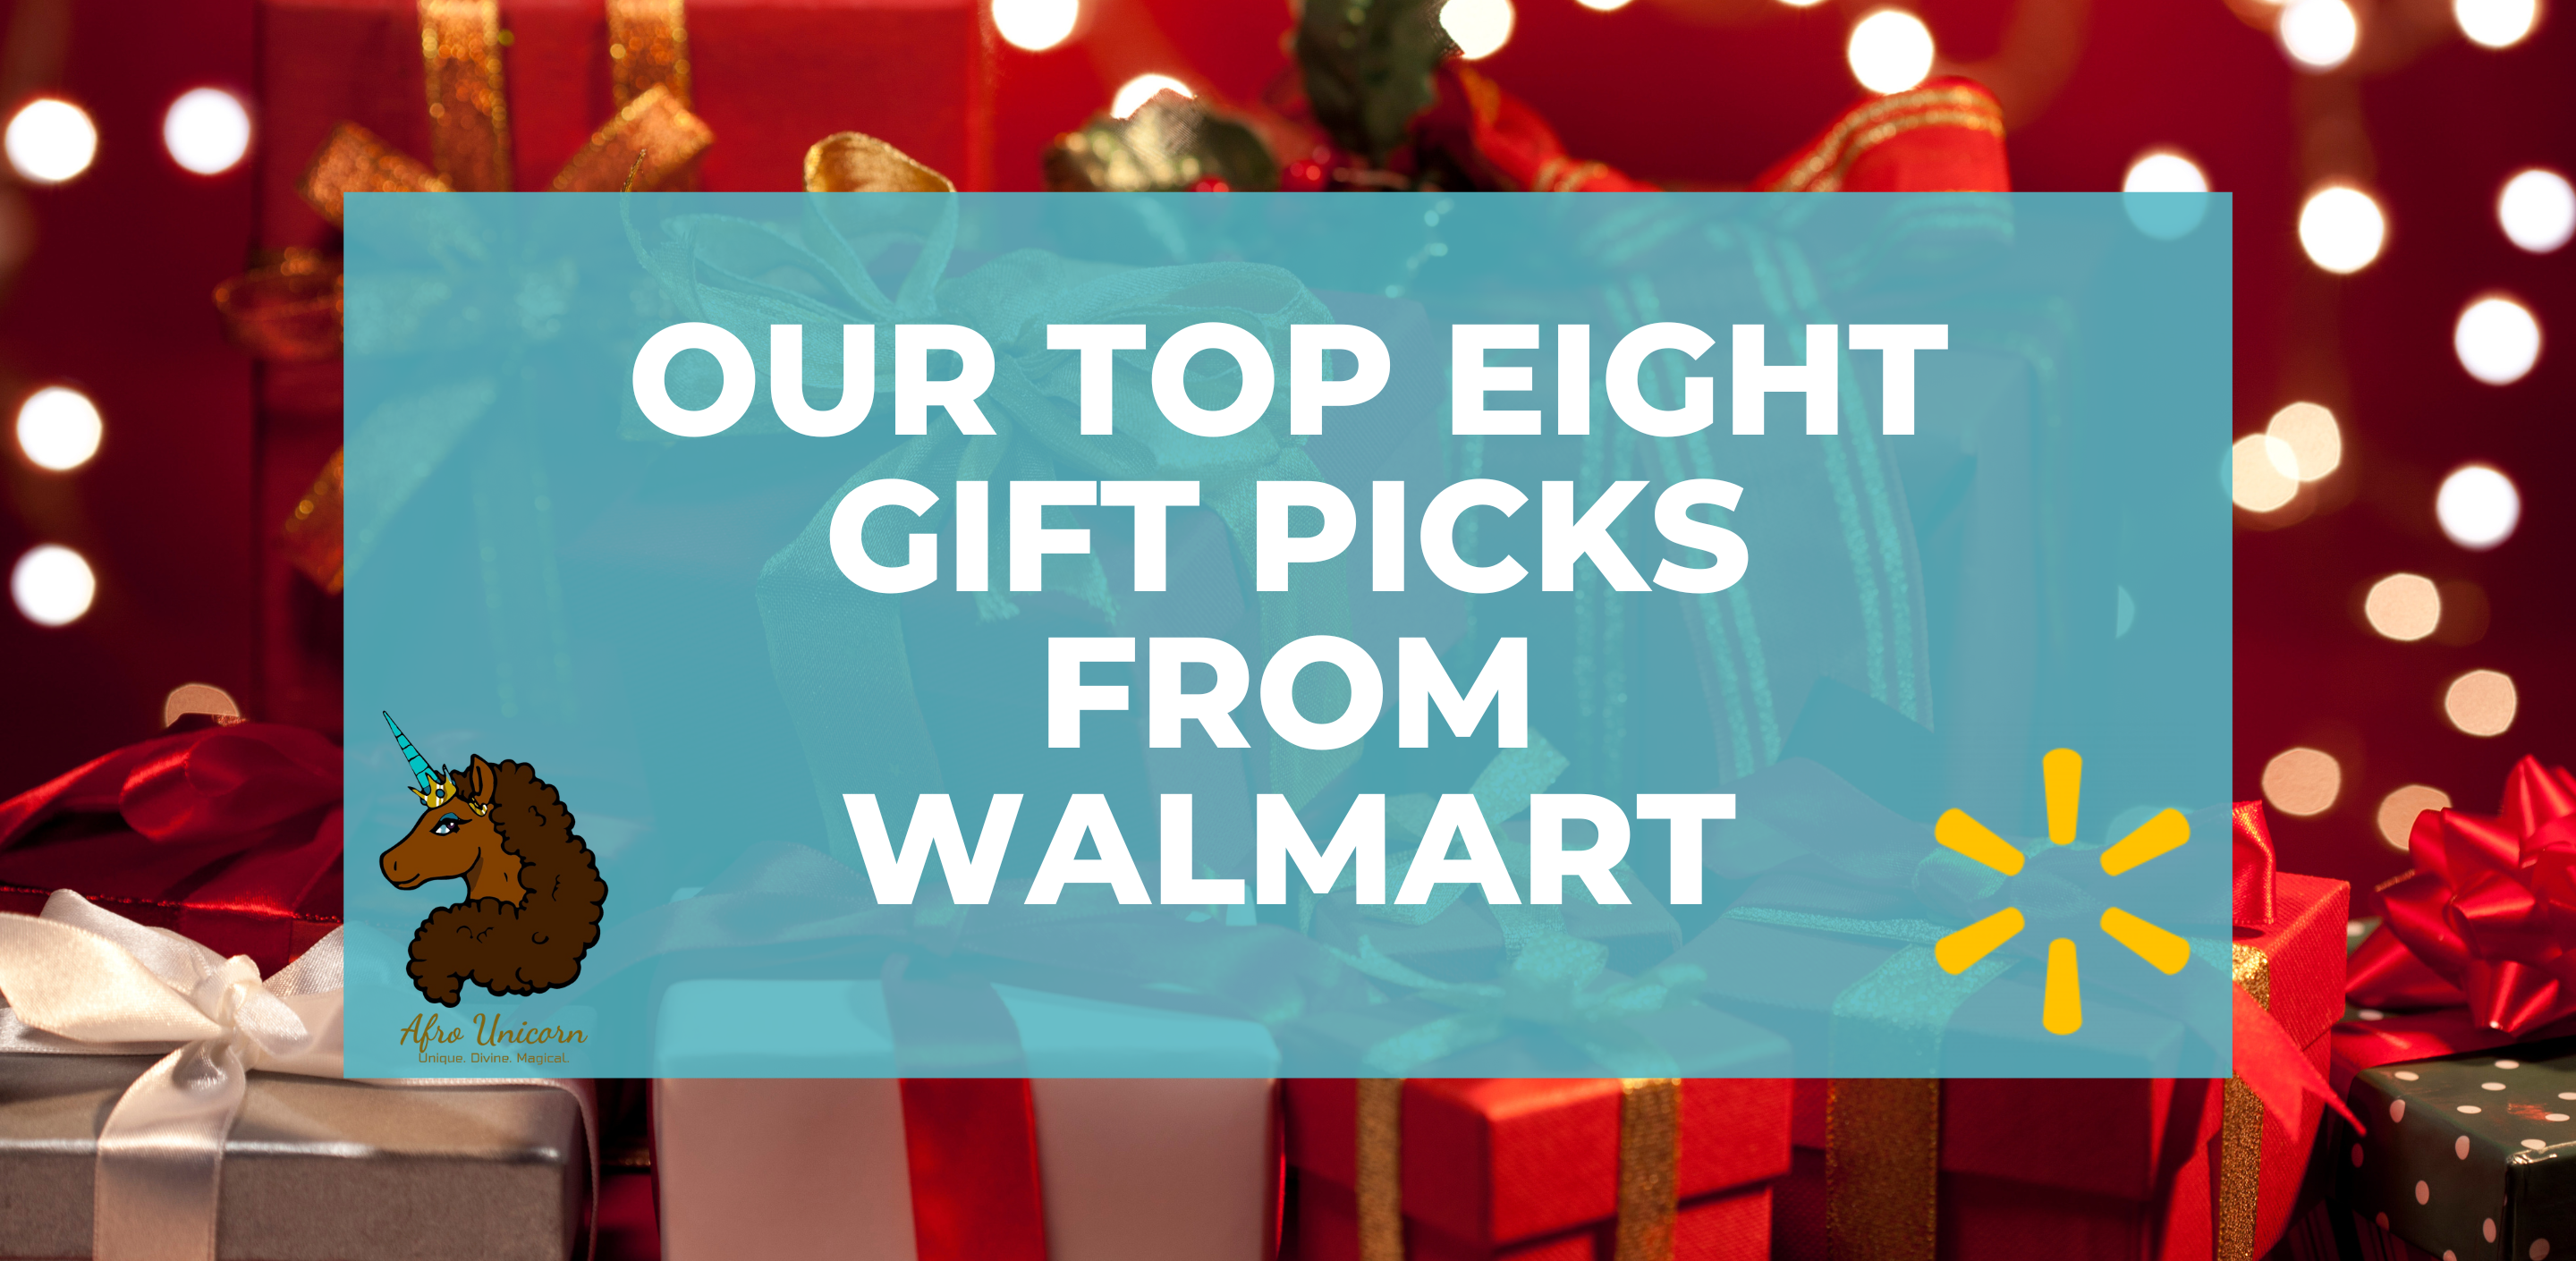 Our Top 8 Gift Picks from Walmart